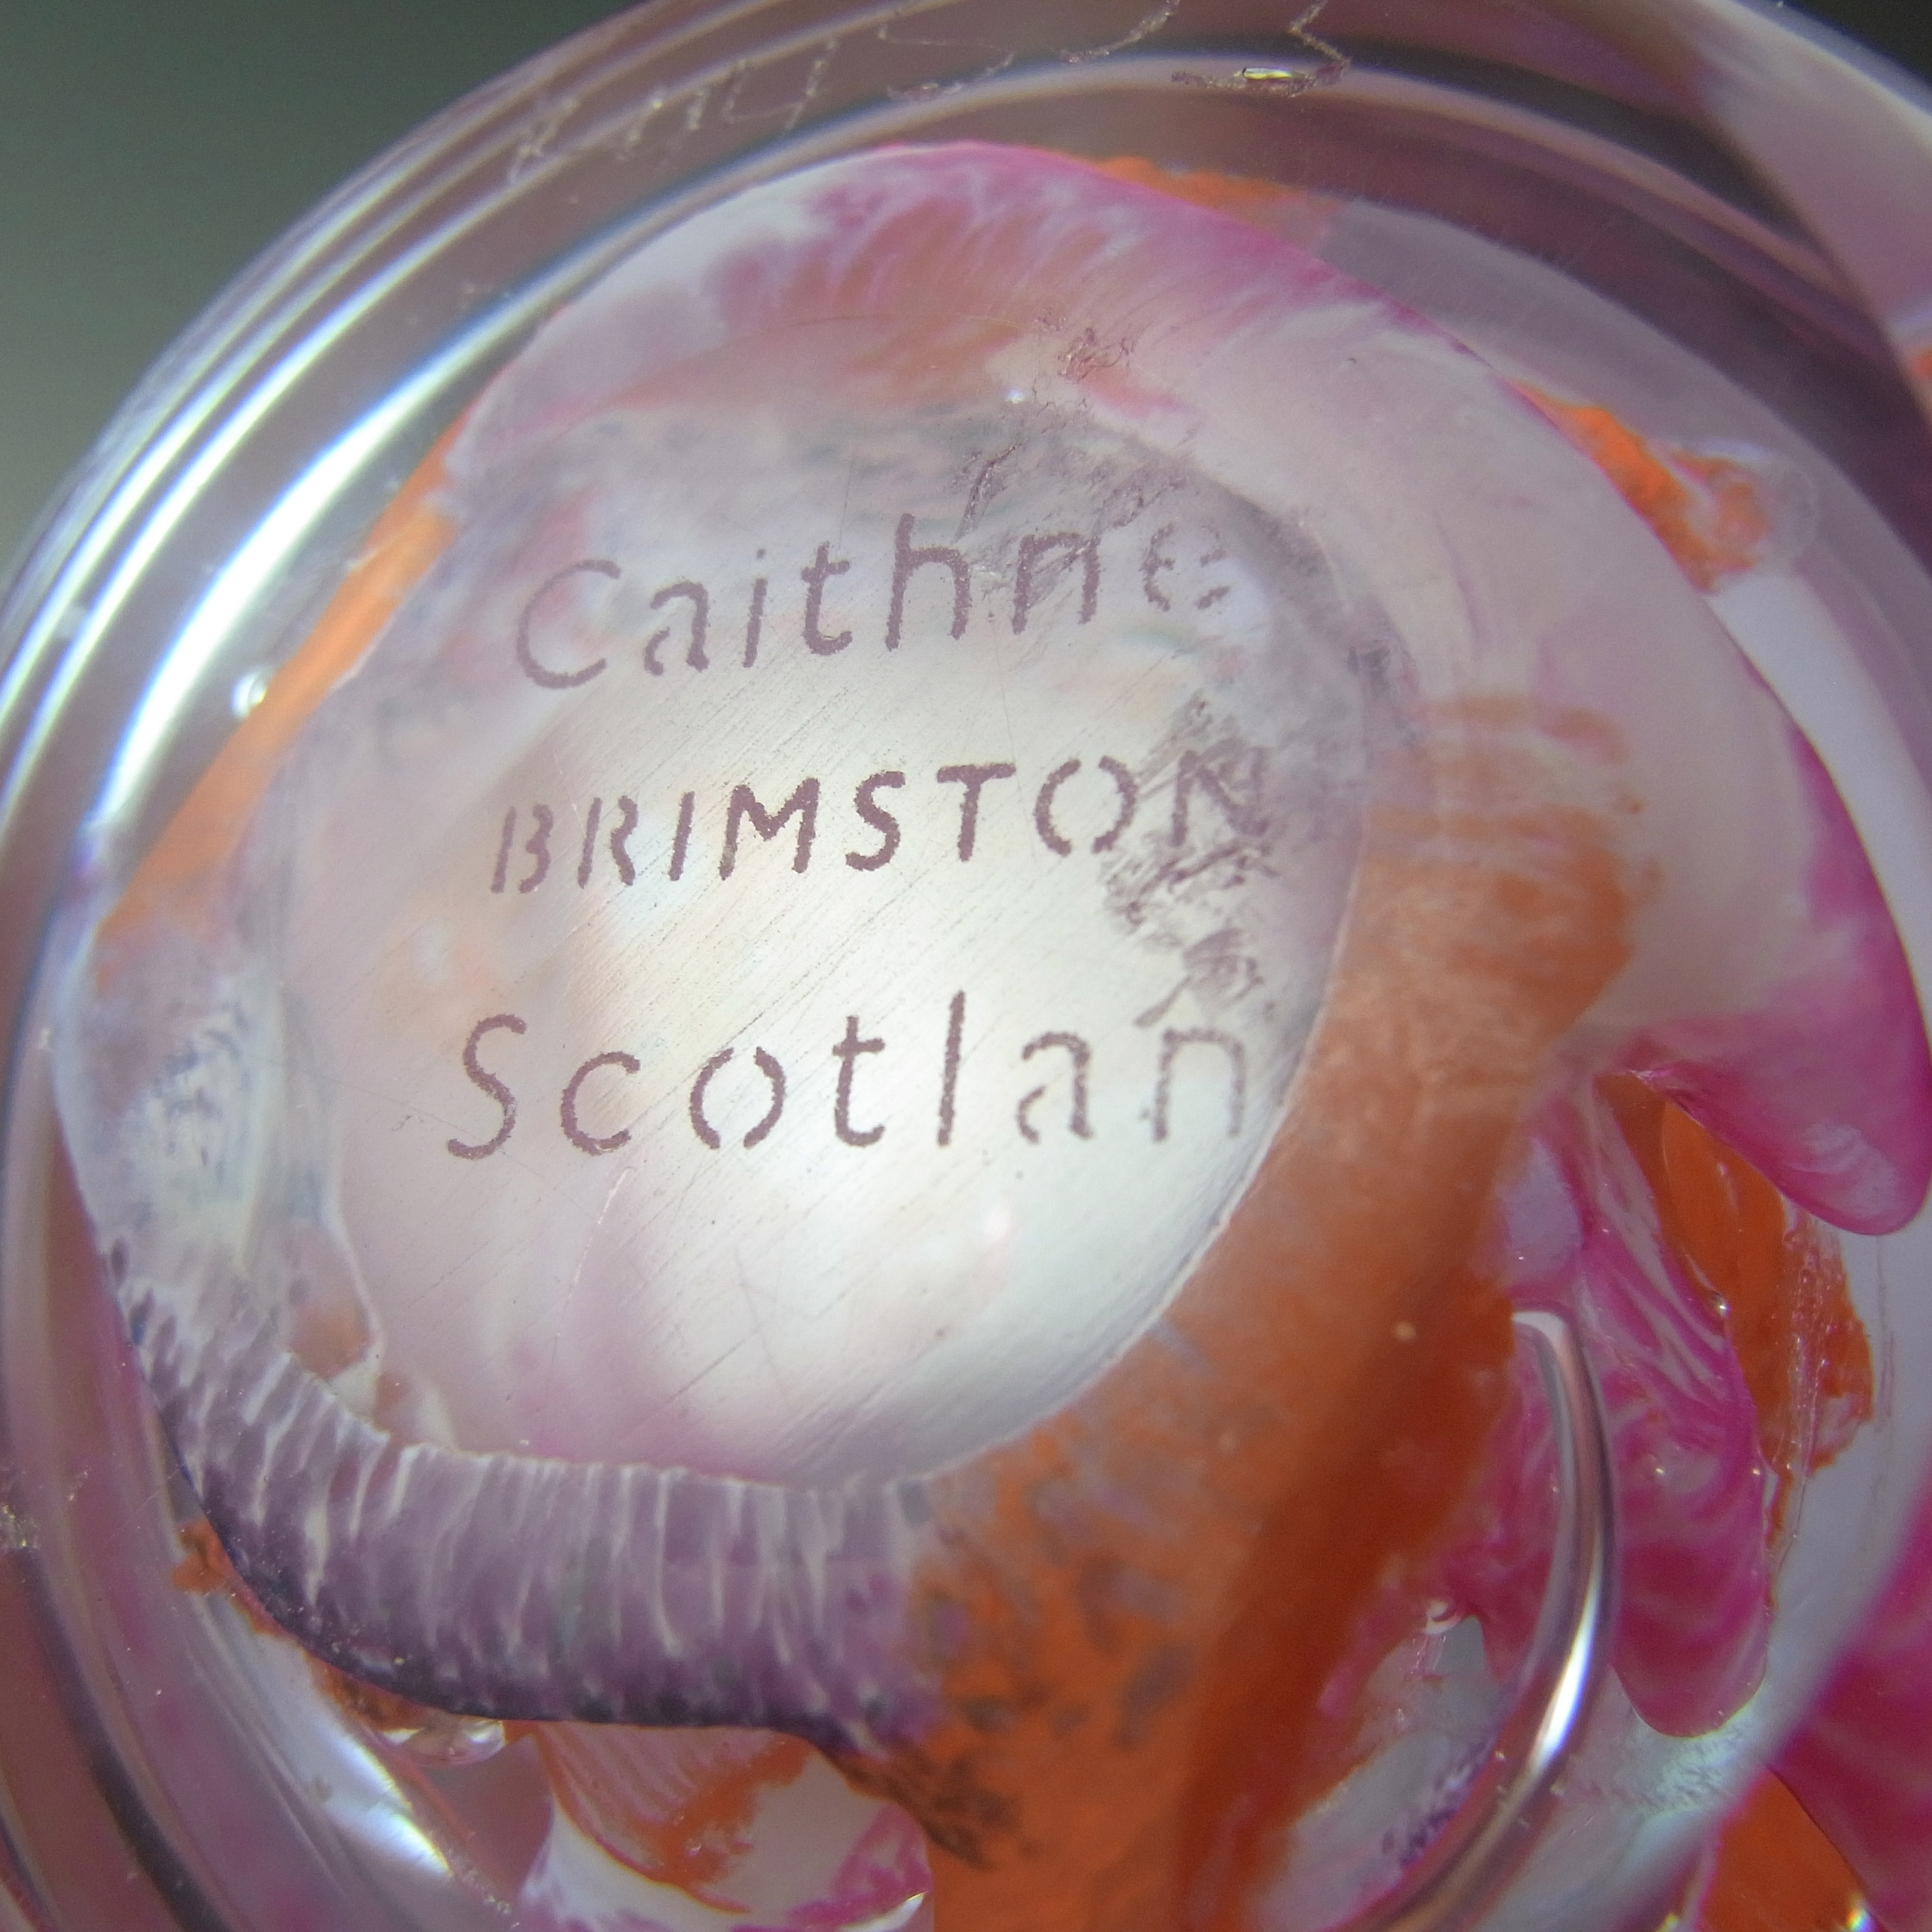 MARKED Caithness Red, Pink & Purple Glass "Brimstone" Paperweight - Click Image to Close